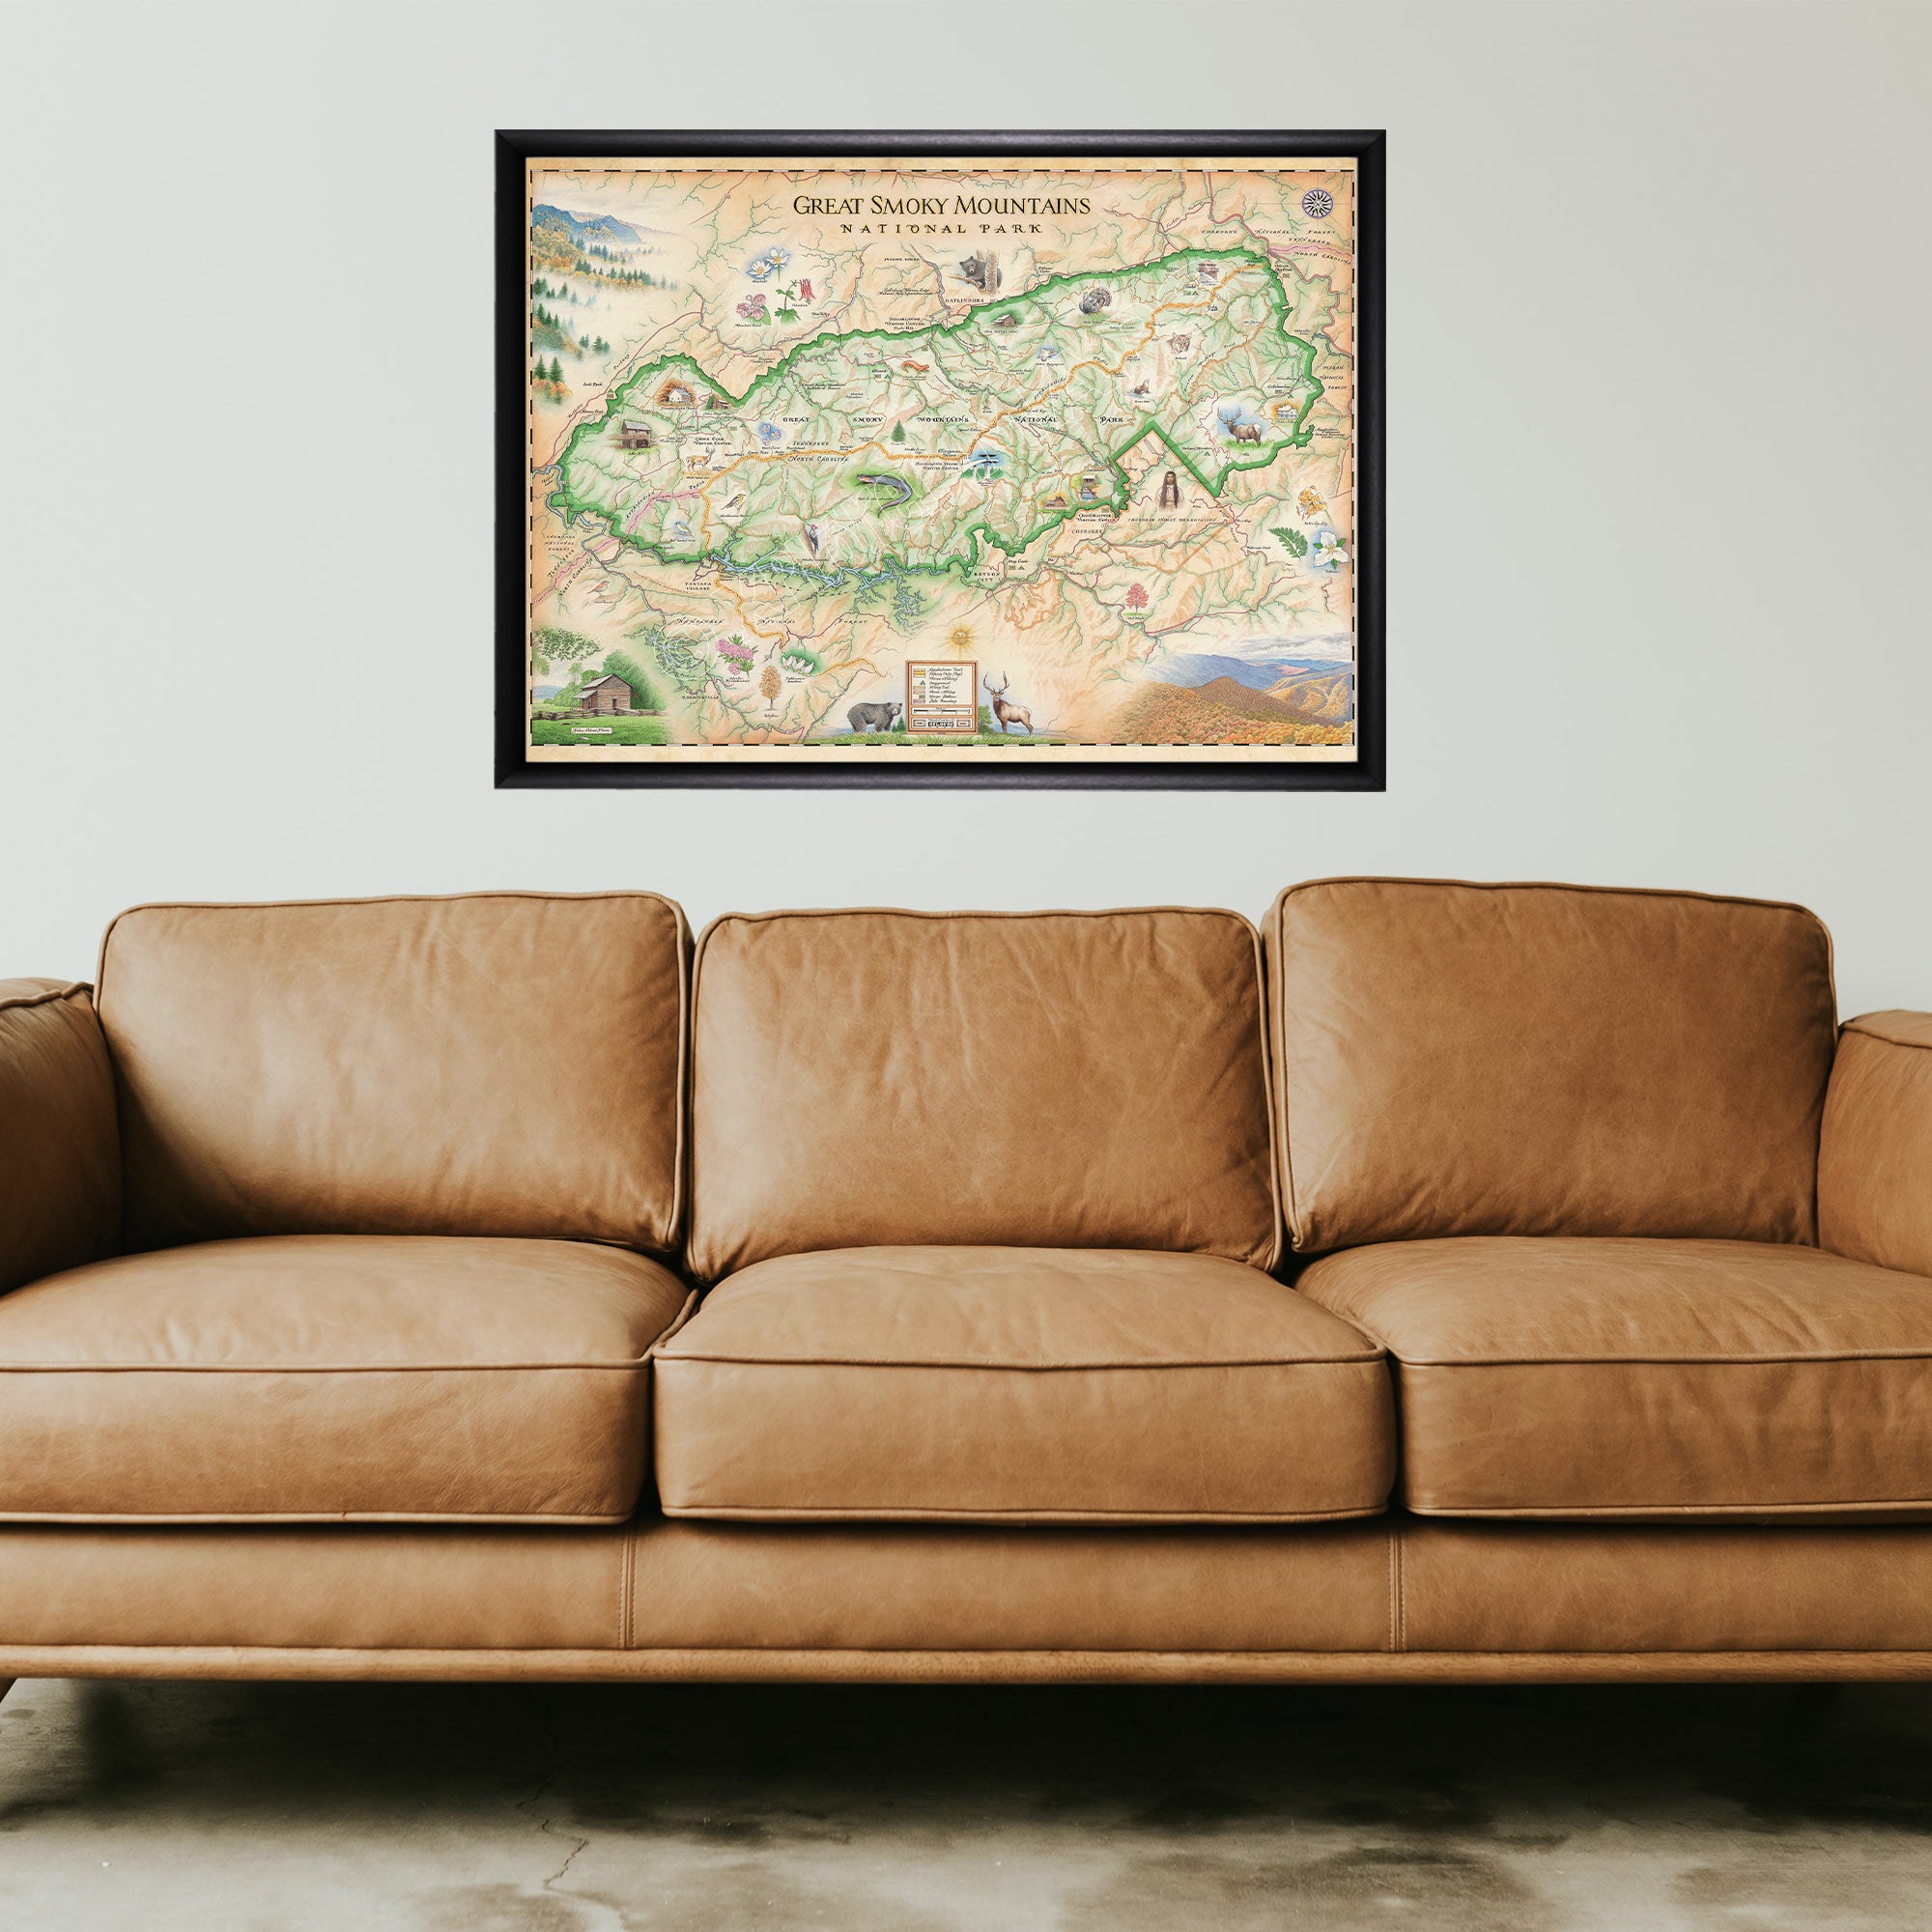 Great Smoky Mountains National Park framed hand-drawn map in a black frame hanging above a brown leather couch.